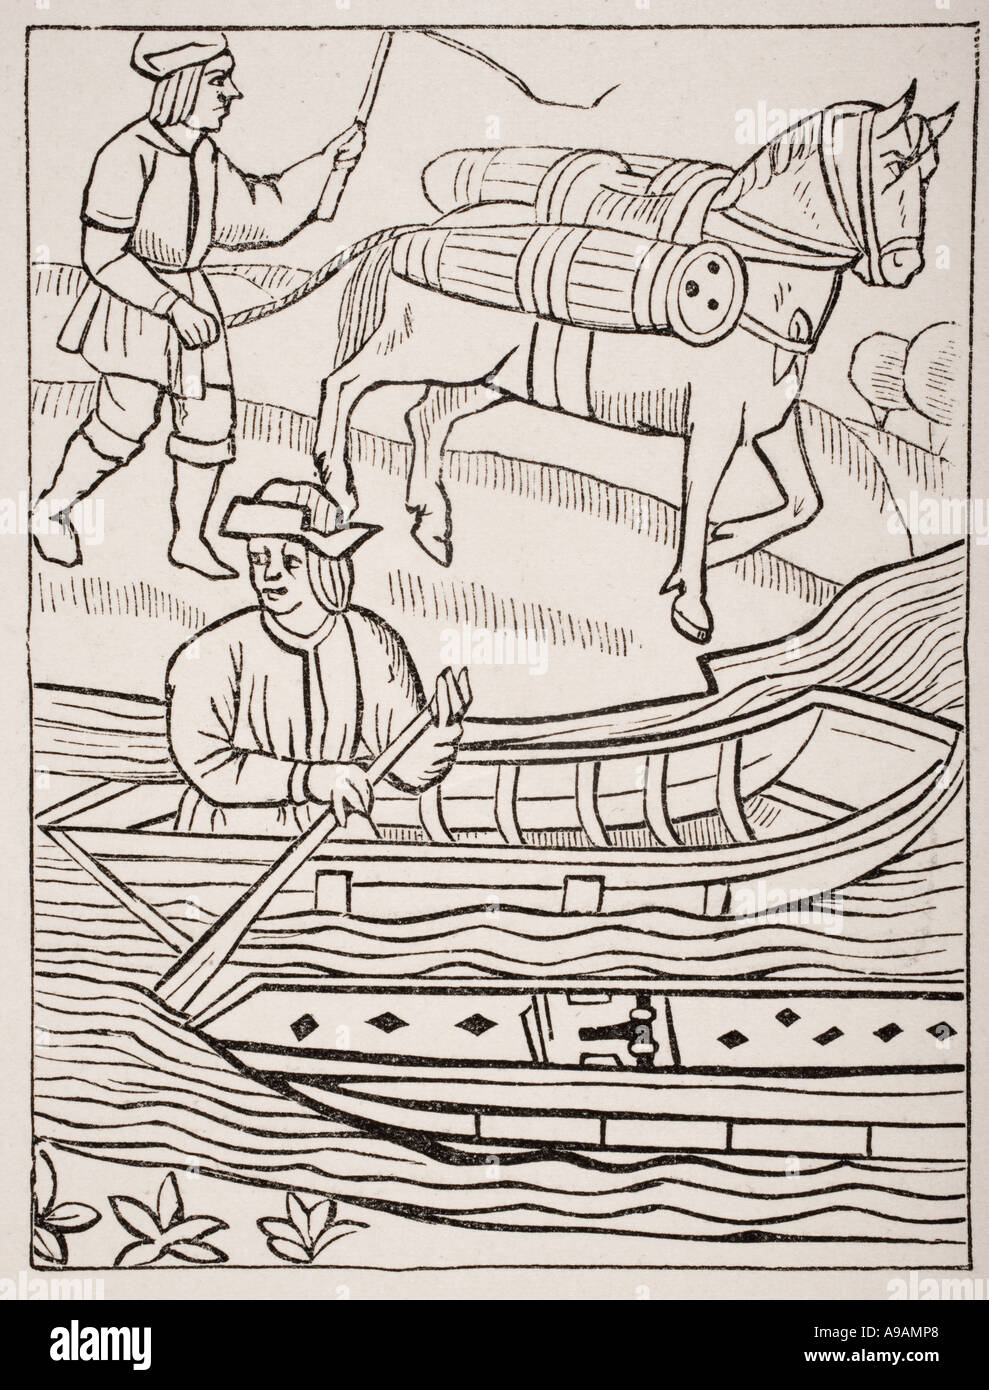 Conveyance of fish by water and land. 19th century copy of an engraving in the Royal Statutes of the Provostship of Merchants, 1528. Stock Photo